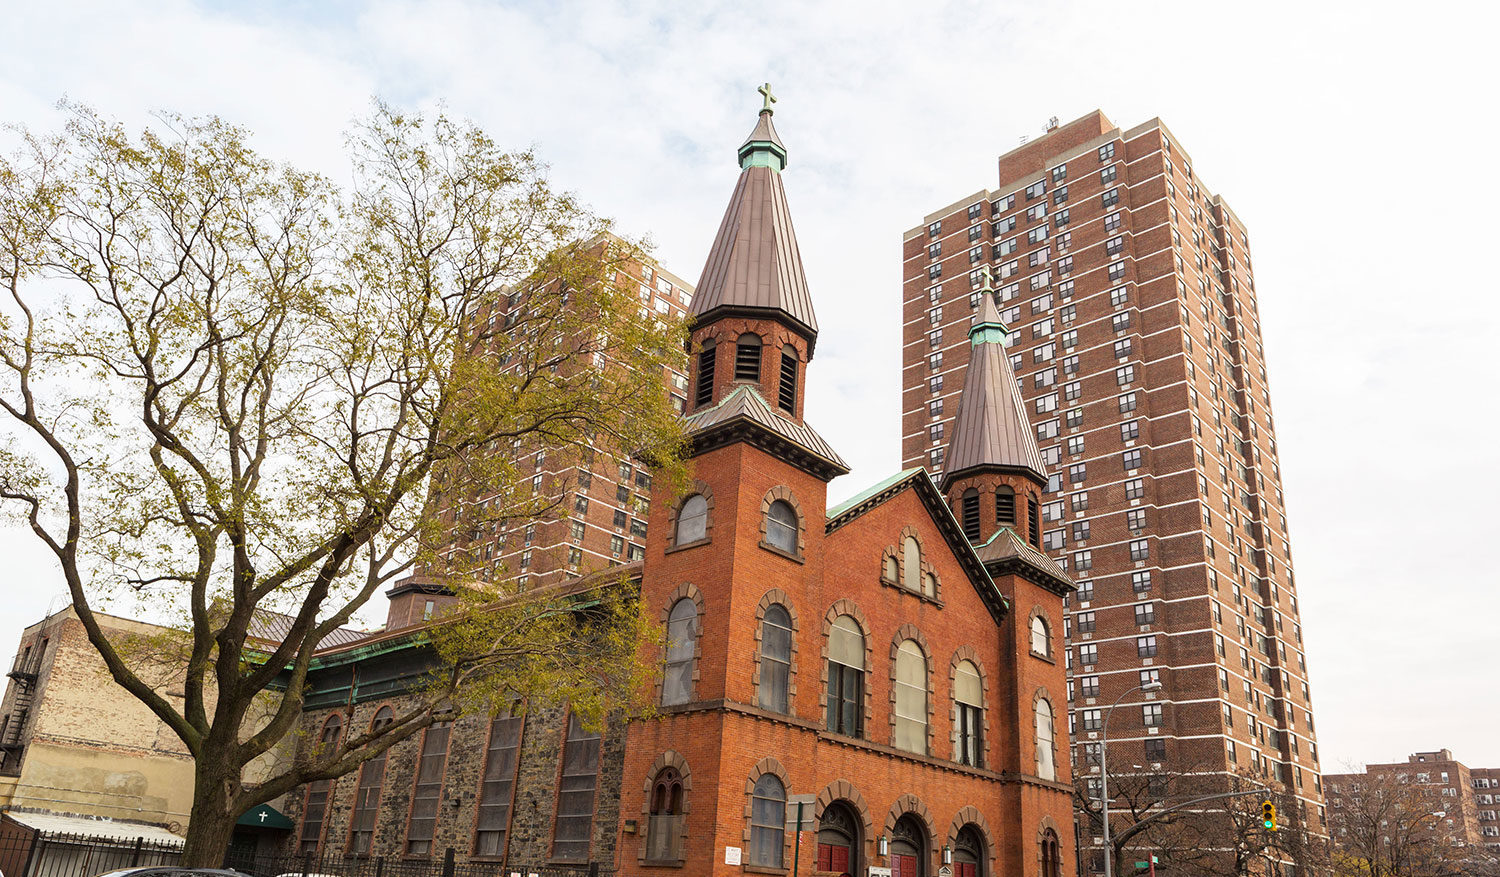 Exterior of the Archdiocese of New York’s St. Mary’s Parish